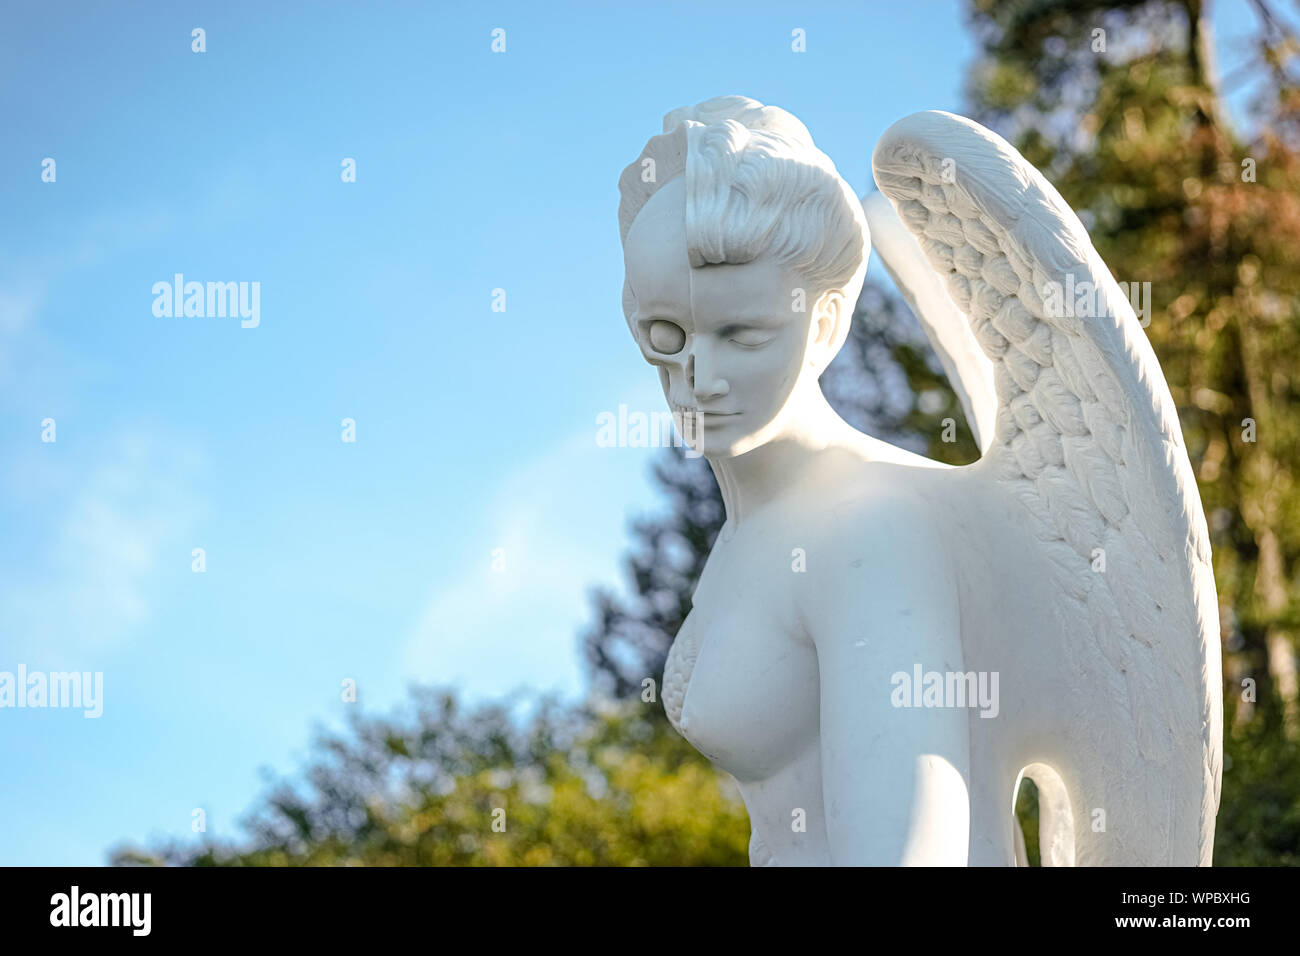 Detail of the sculpture  'Anatomy of an angel' by the artist Damien Hirst in the fall in the Ekebergparken Sculpture Park in Oslo, Norway. A sculpture Stock Photo